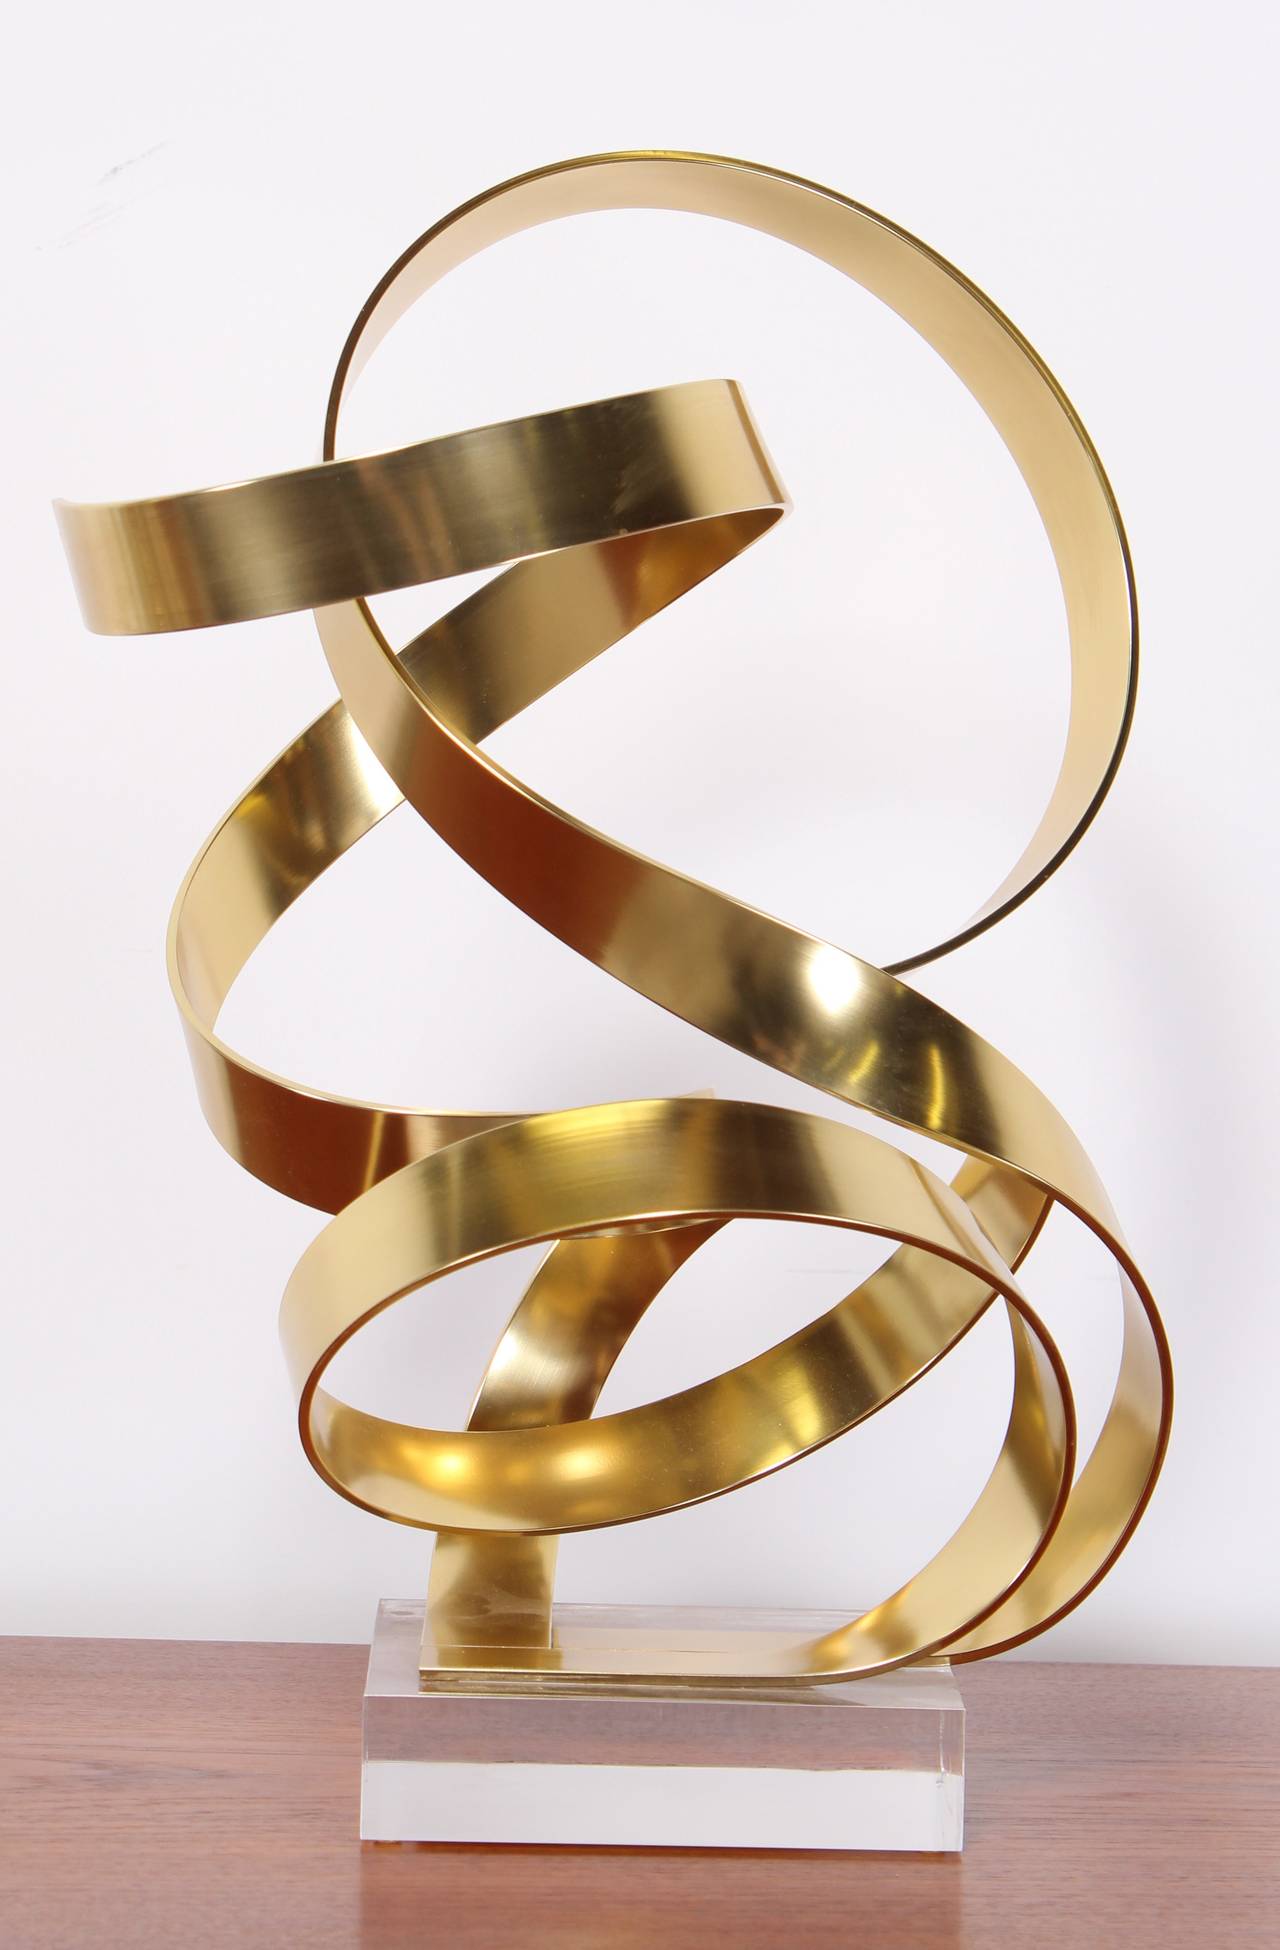 A whimsical gold tone anodized aluminum ribbon sculpture on a Lucite base signed by Dan Murphy 1985.